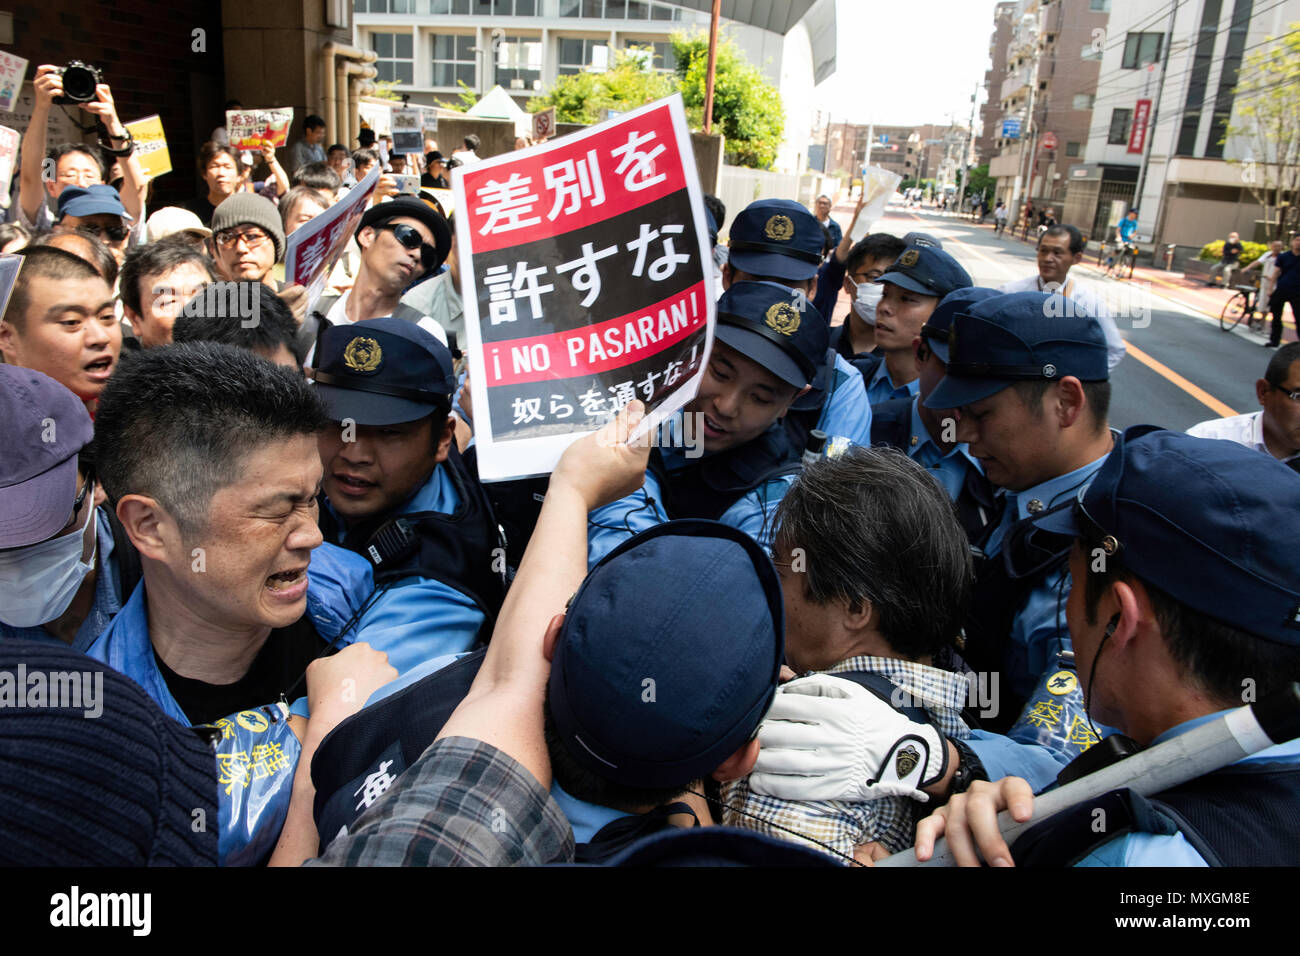 KAWASAKI, JAPAN - JUNE 03: Protesters holding up signs, including one saying 'NO HATE & NO RACISM' gather in front of Educational Cultural Hall in Kawasaki, Kanagawa prefecture, Japan on June 3, 2018. The anti-racist group forcefully stop the nationalists attendees from entering the building for a planned meeting by a hate speech members in Kanto region following a scuffle with the police, nationalists and the protesters. (Photo: Richard Atrero de Guzman/Aflo) Stock Photo